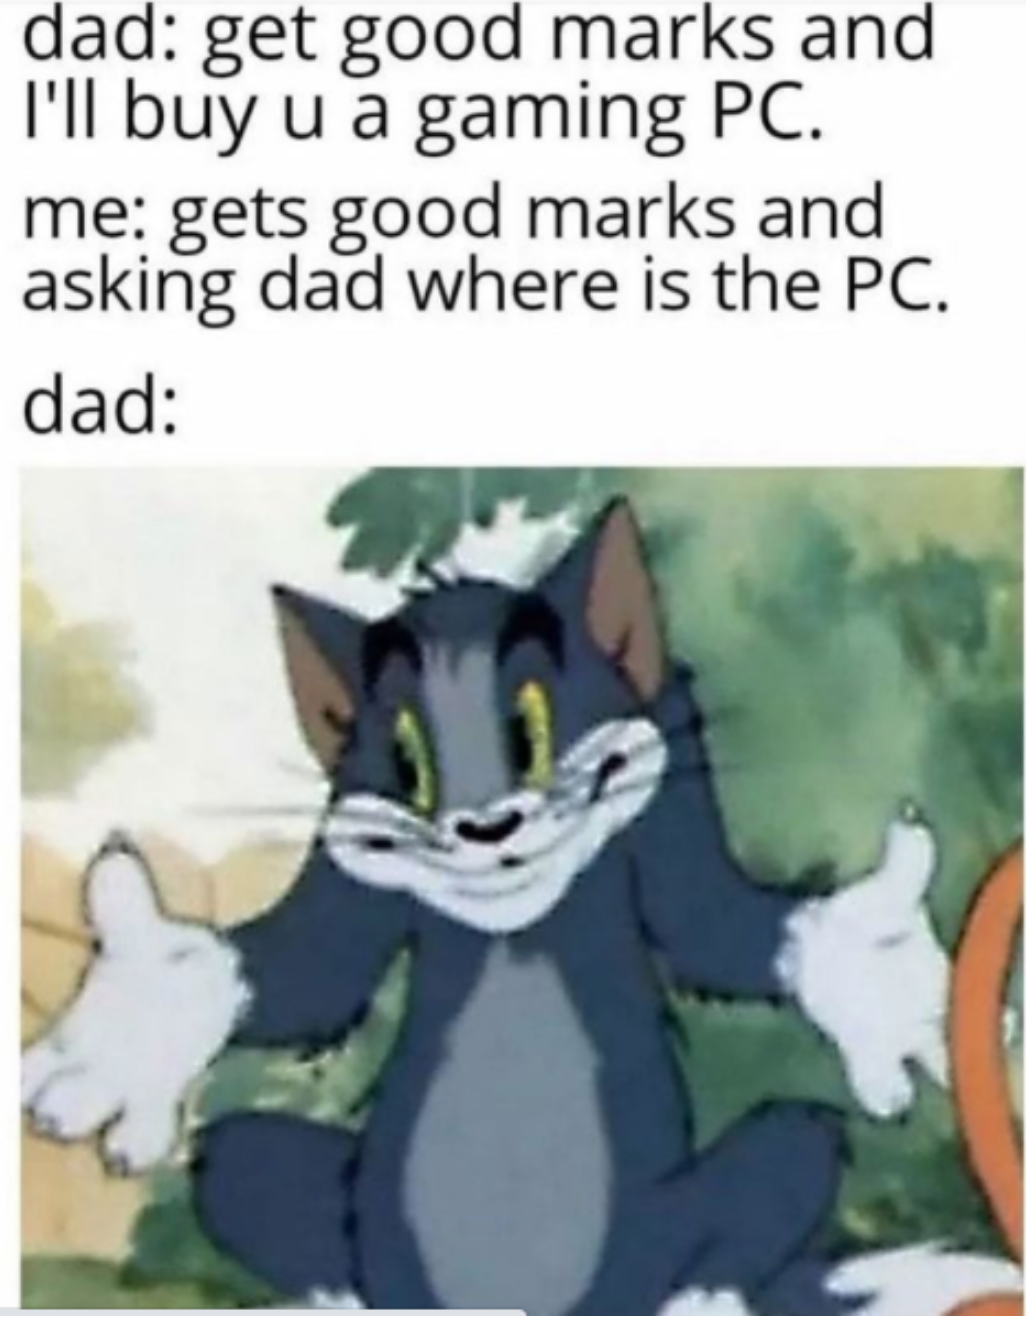 tom and jerry meme - dad get good marks and I'll buy u a gaming Pc. me gets good marks and asking dad where is the Pc. dad